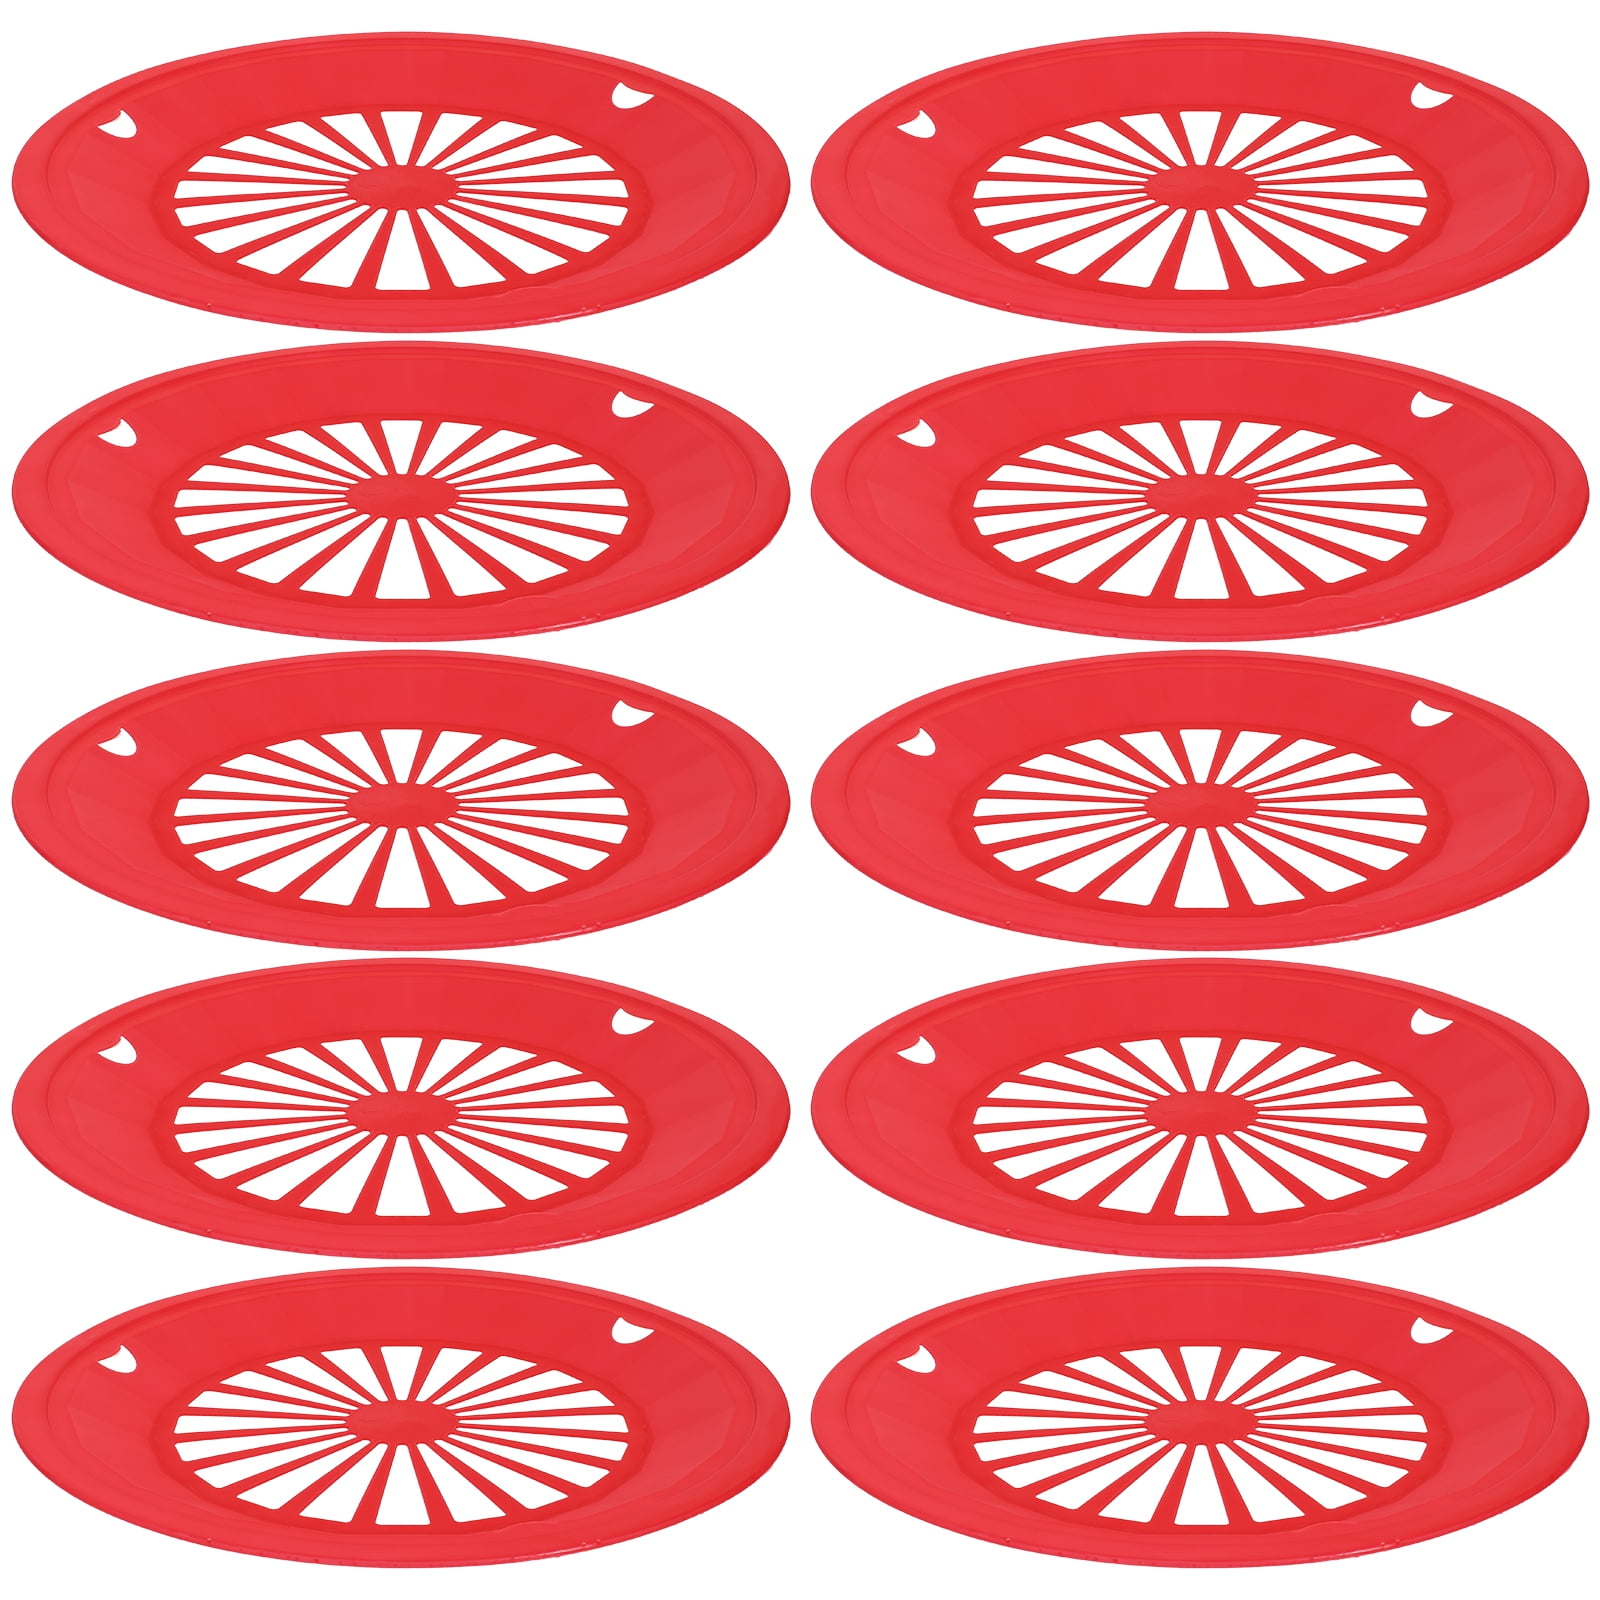 10Pcs BBQ Paper Plate Holder Plastic Dinner Plates Reusable Barbecue ...